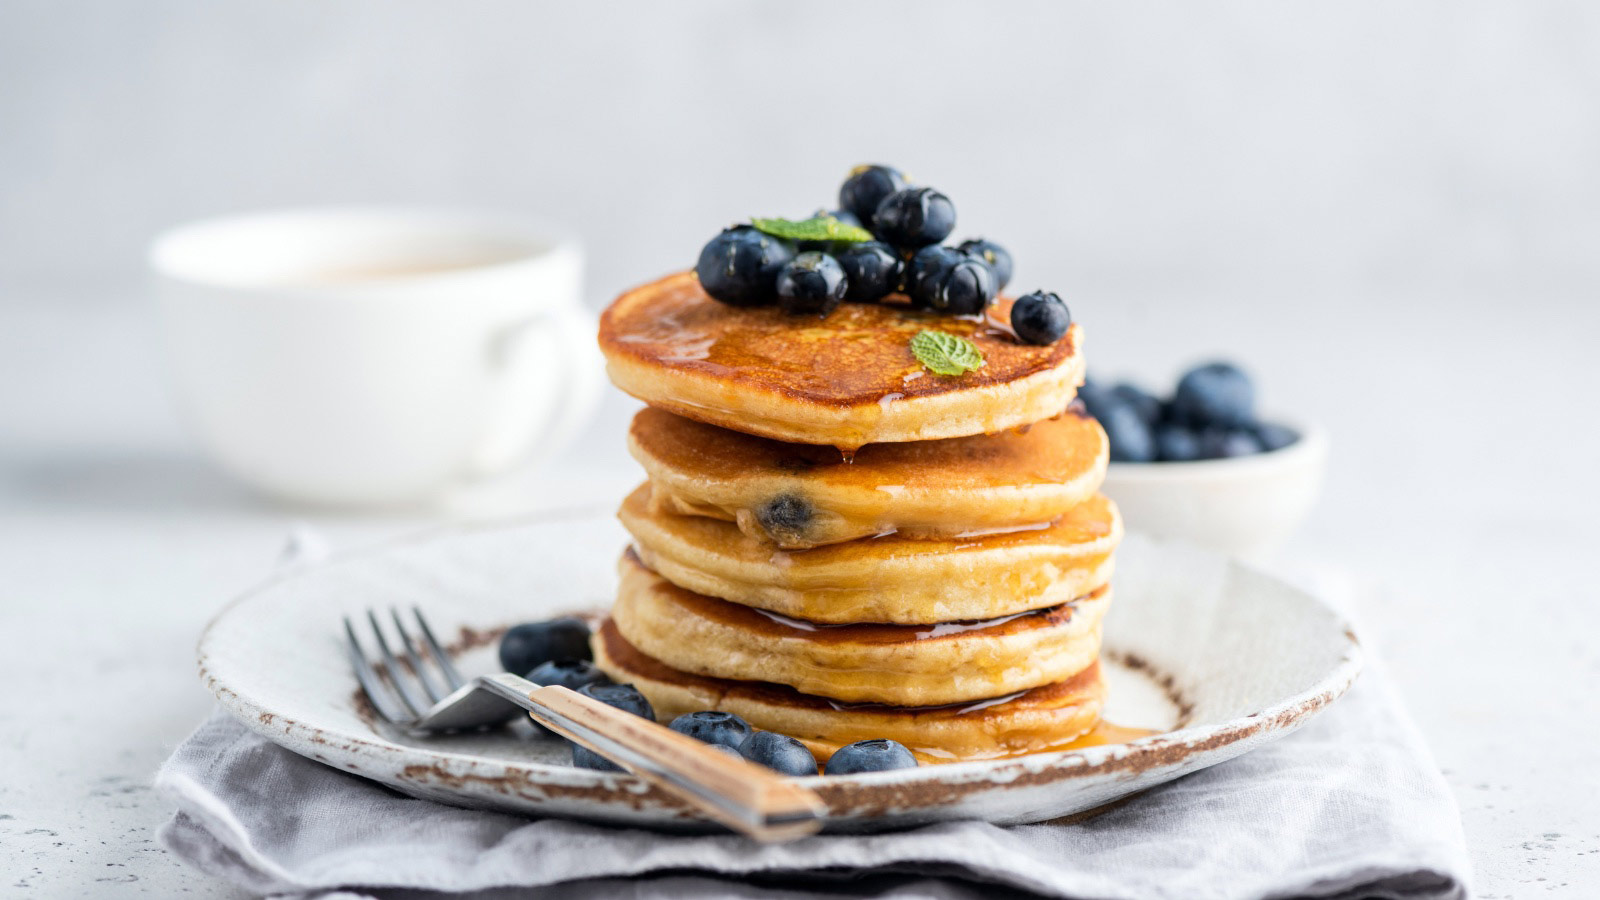 Tasty pancakes with blueberries and honey on a plate. Grey background